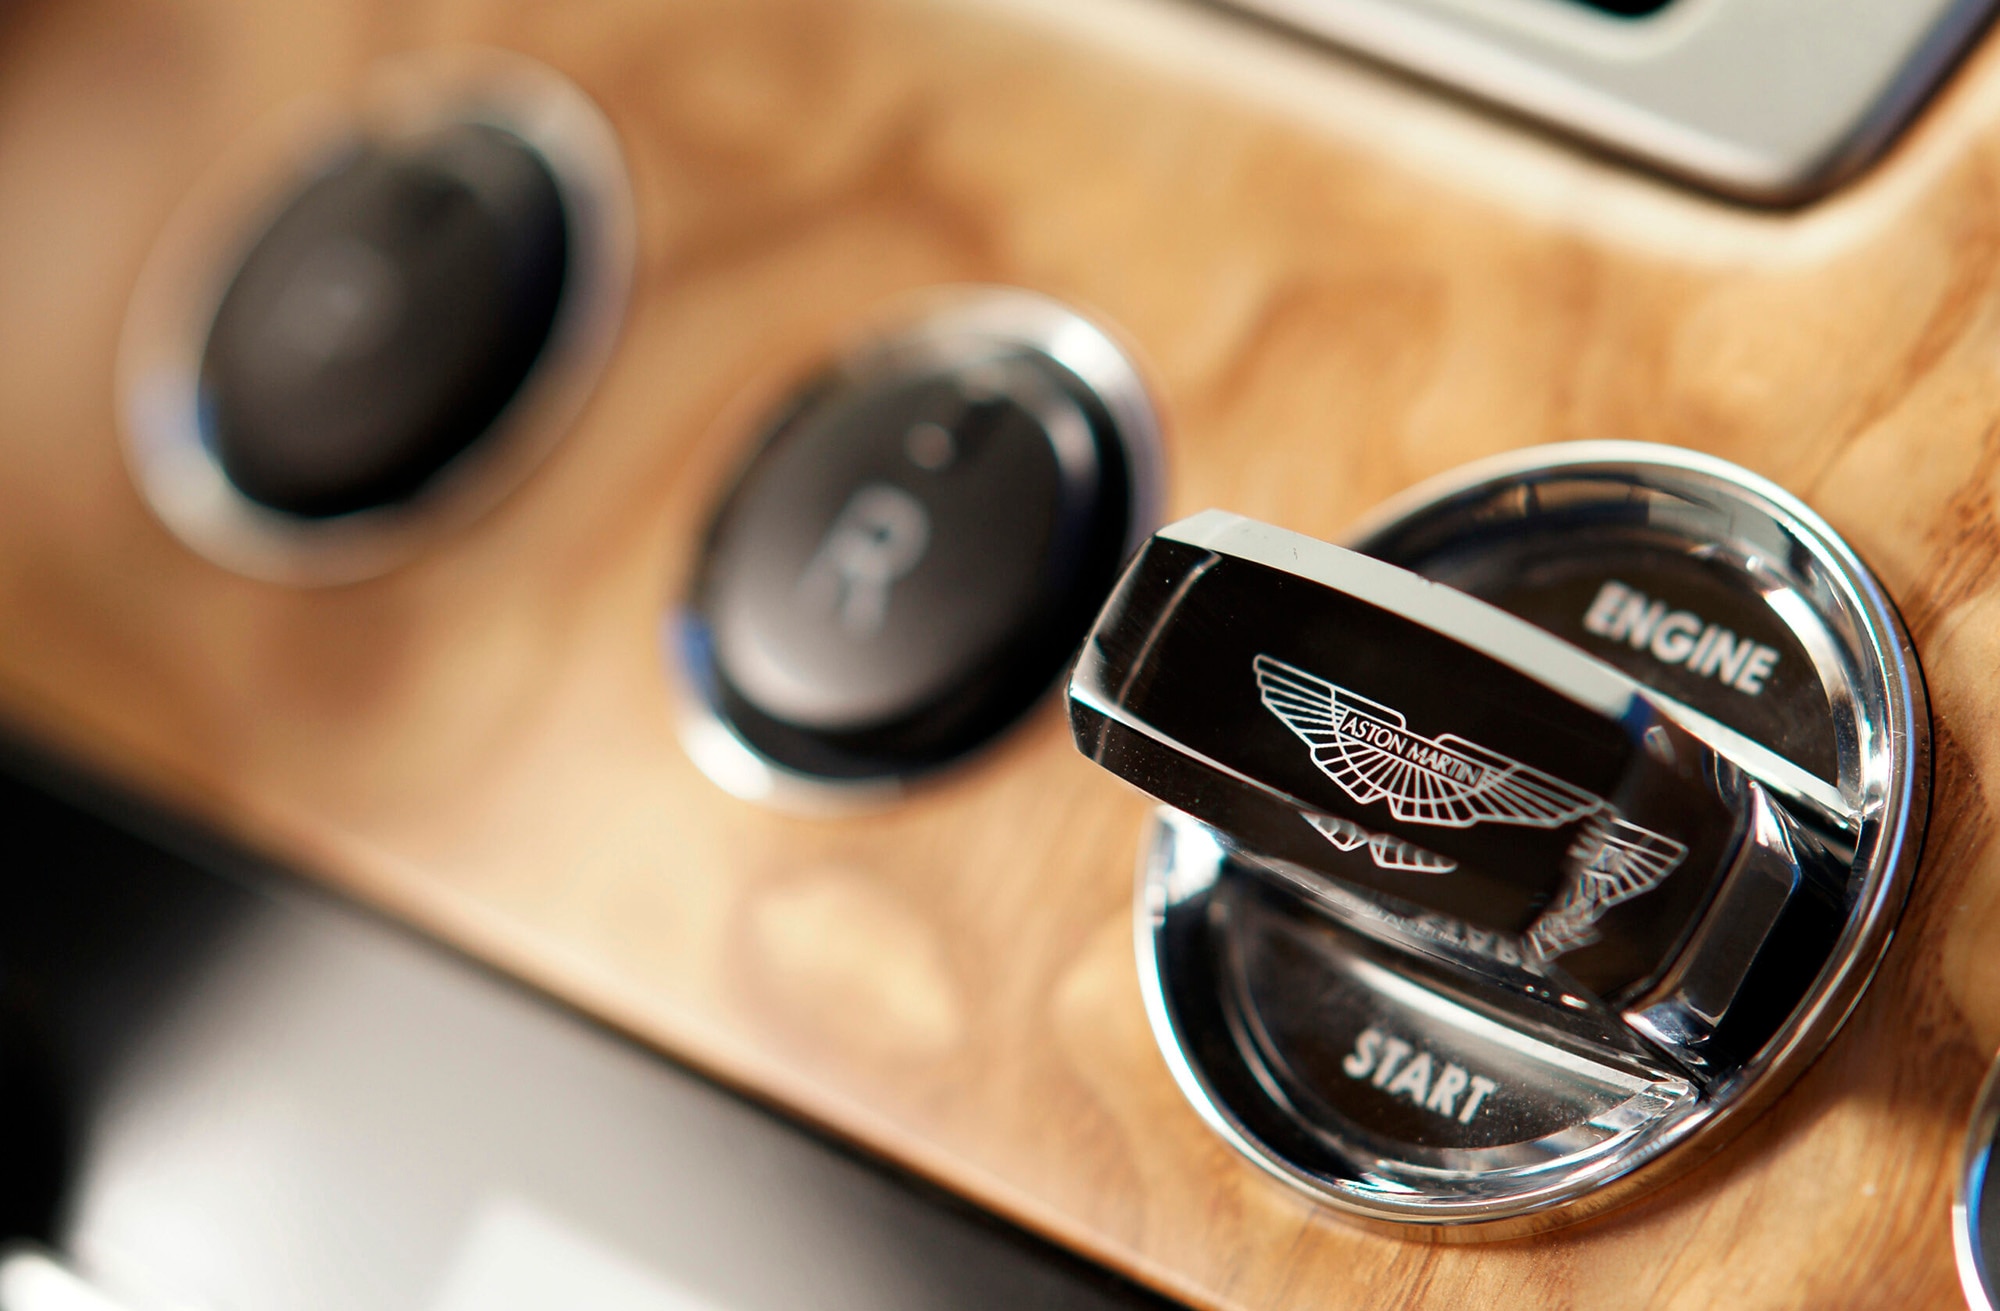 A crystal-topped key fob sticking out on an Aston Martin Rapide dashboard